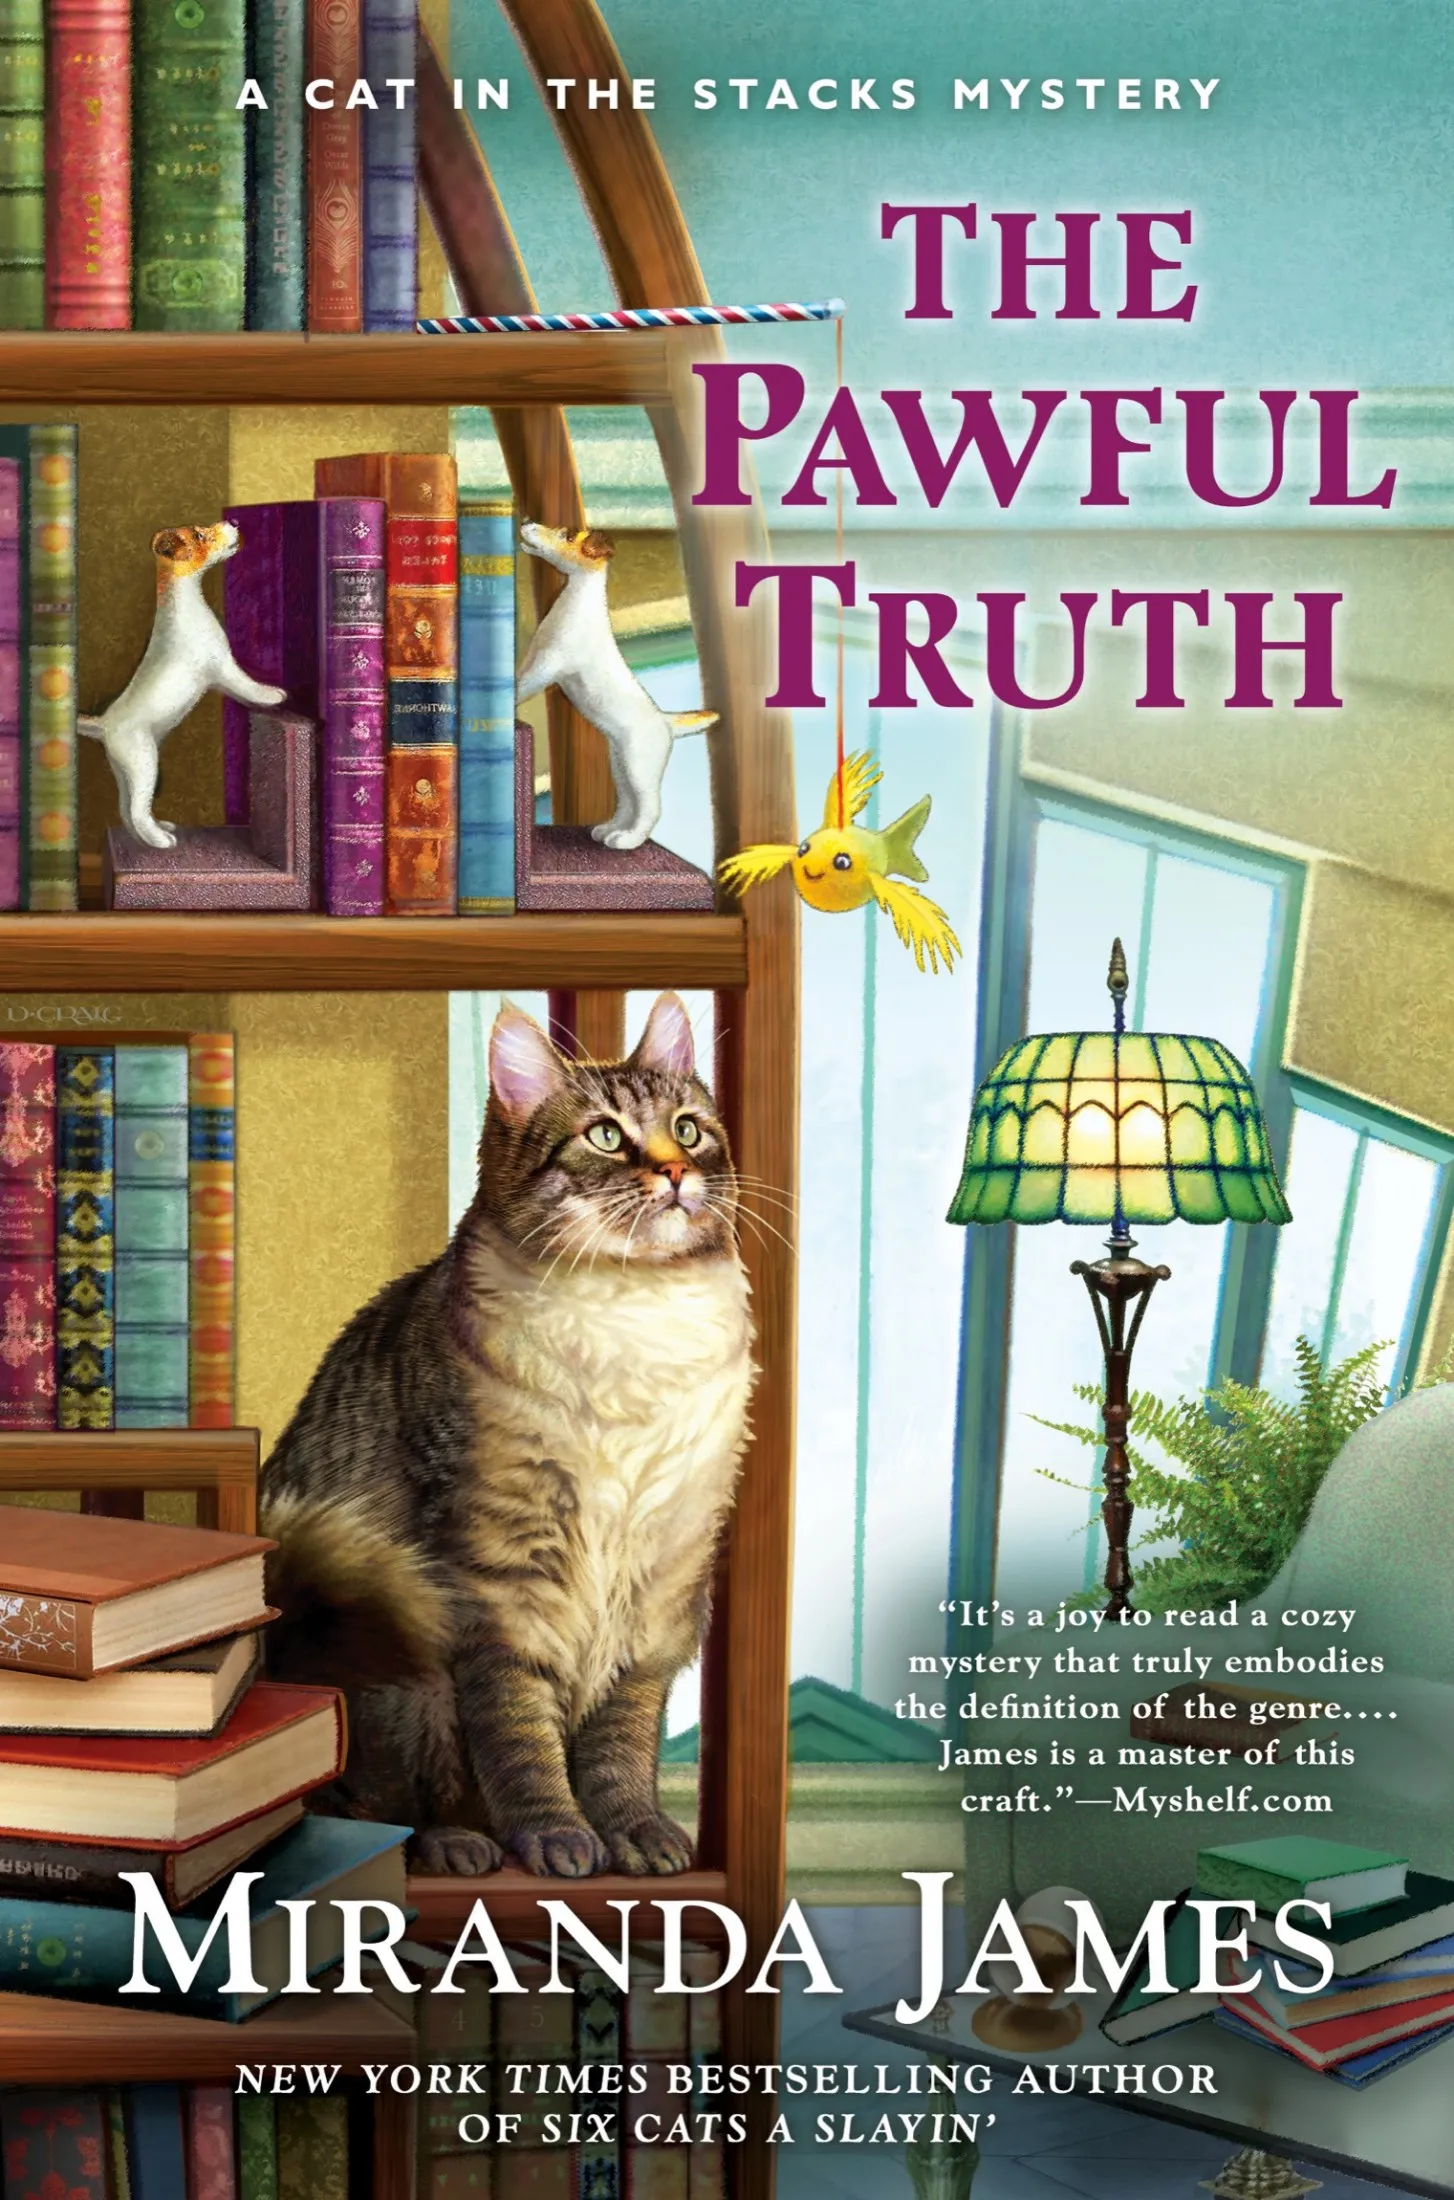 The Pawful Truth (Cat in the Stacks Mystery #11)